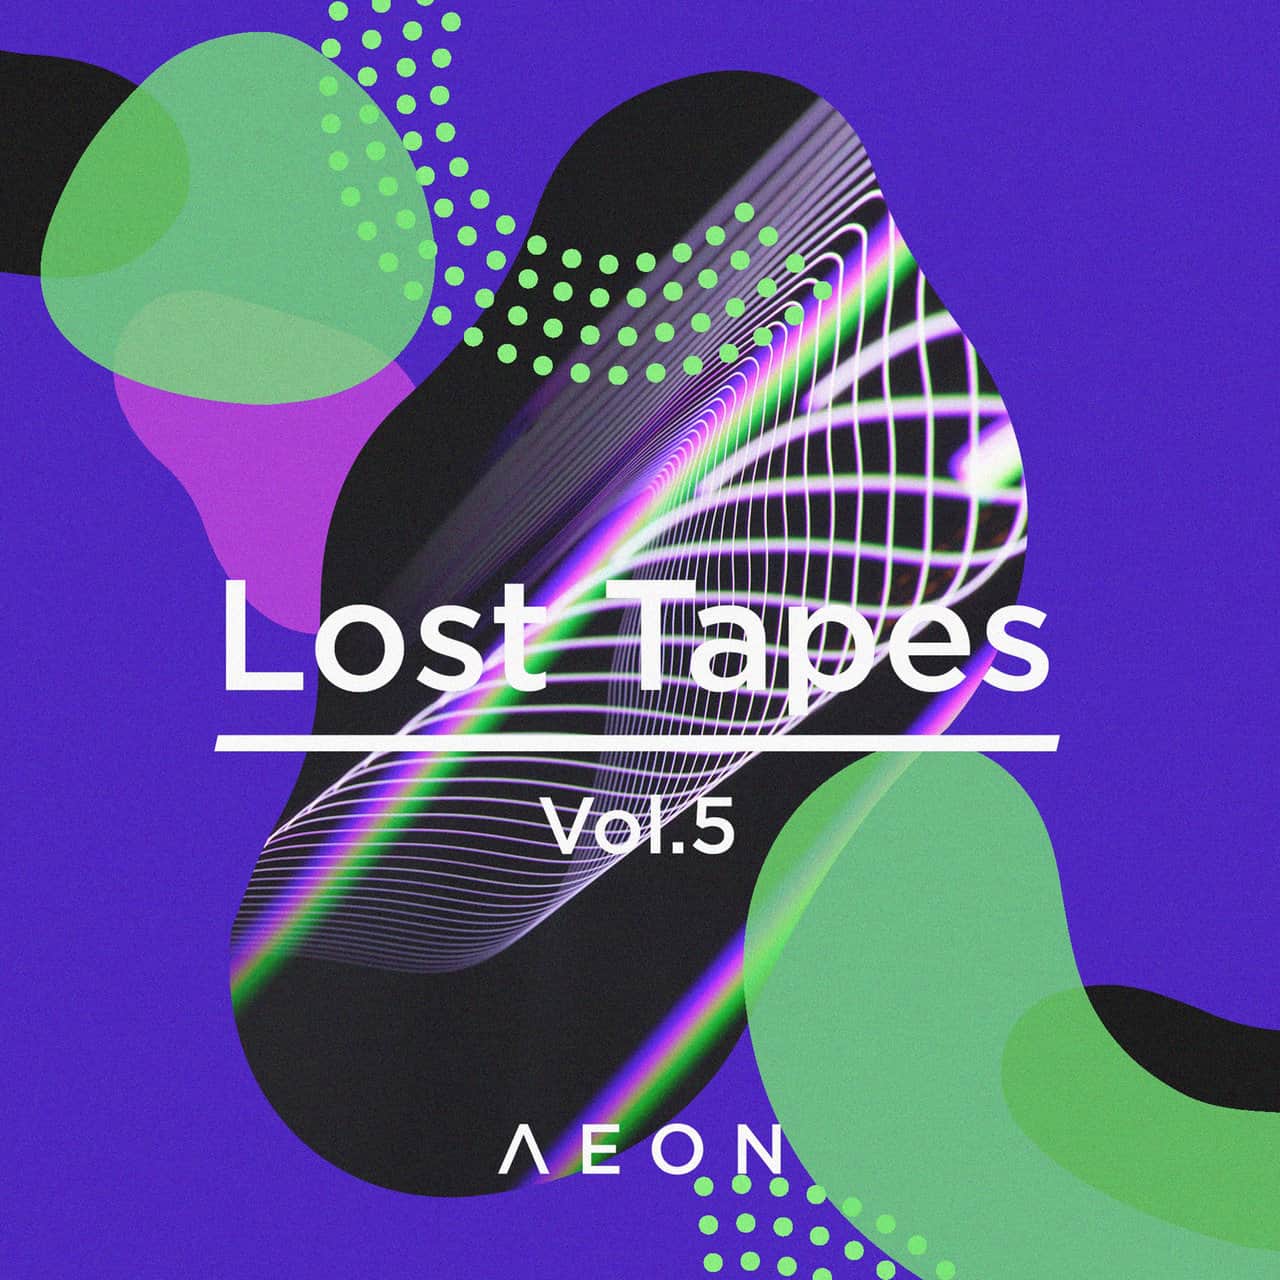 Download Lost Tapes Vol. 5 on Electrobuzz